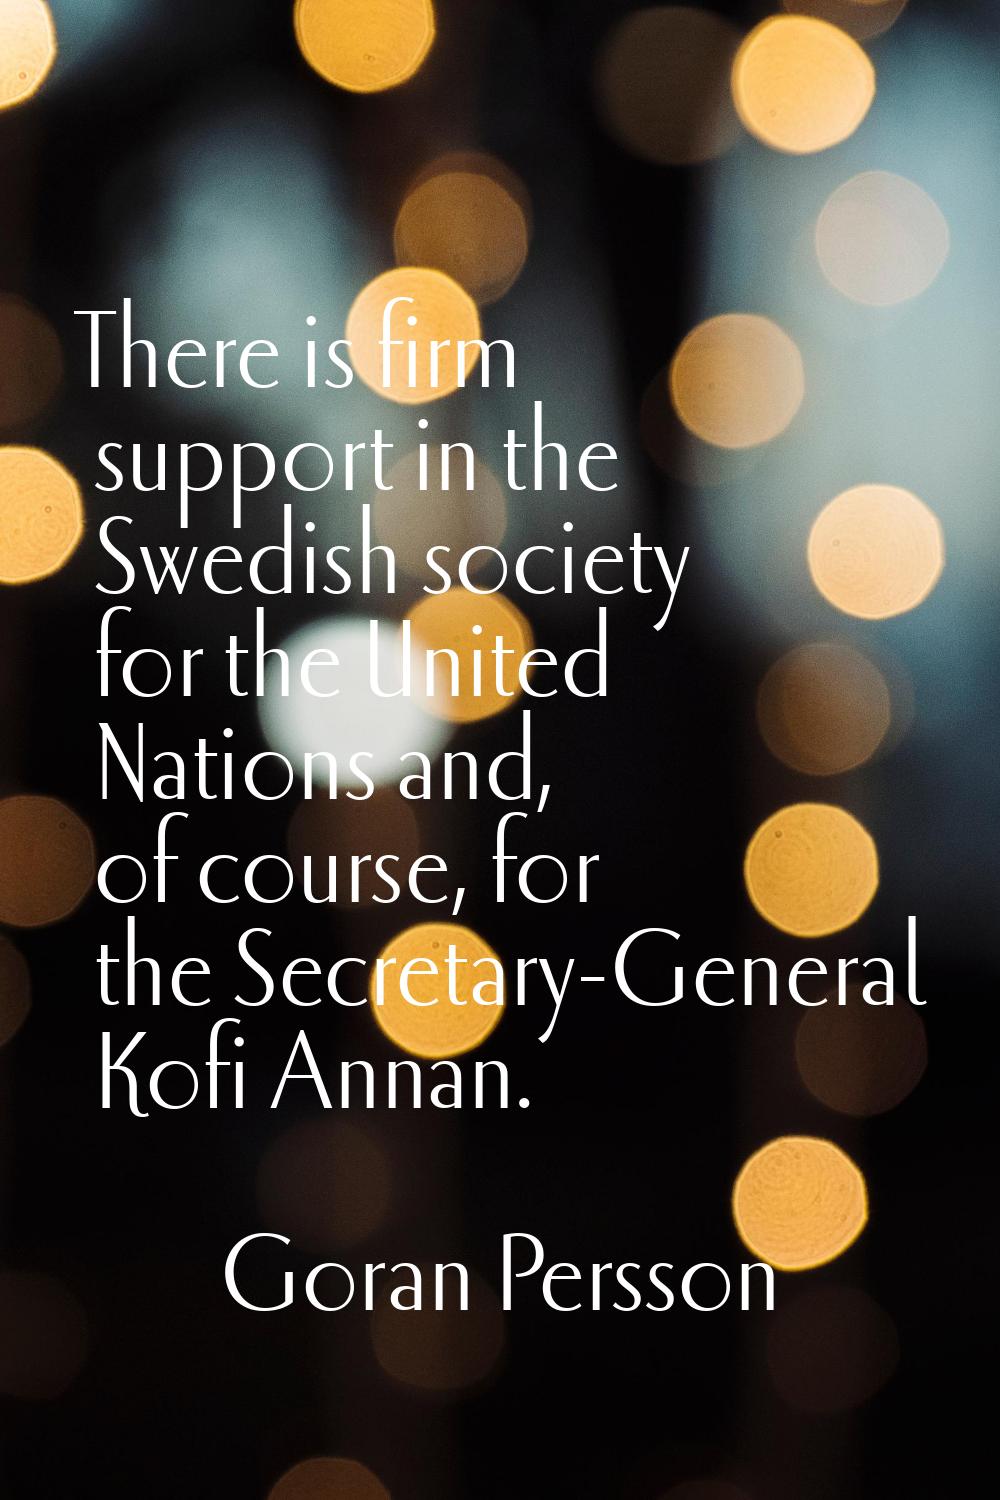 There is firm support in the Swedish society for the United Nations and, of course, for the Secreta